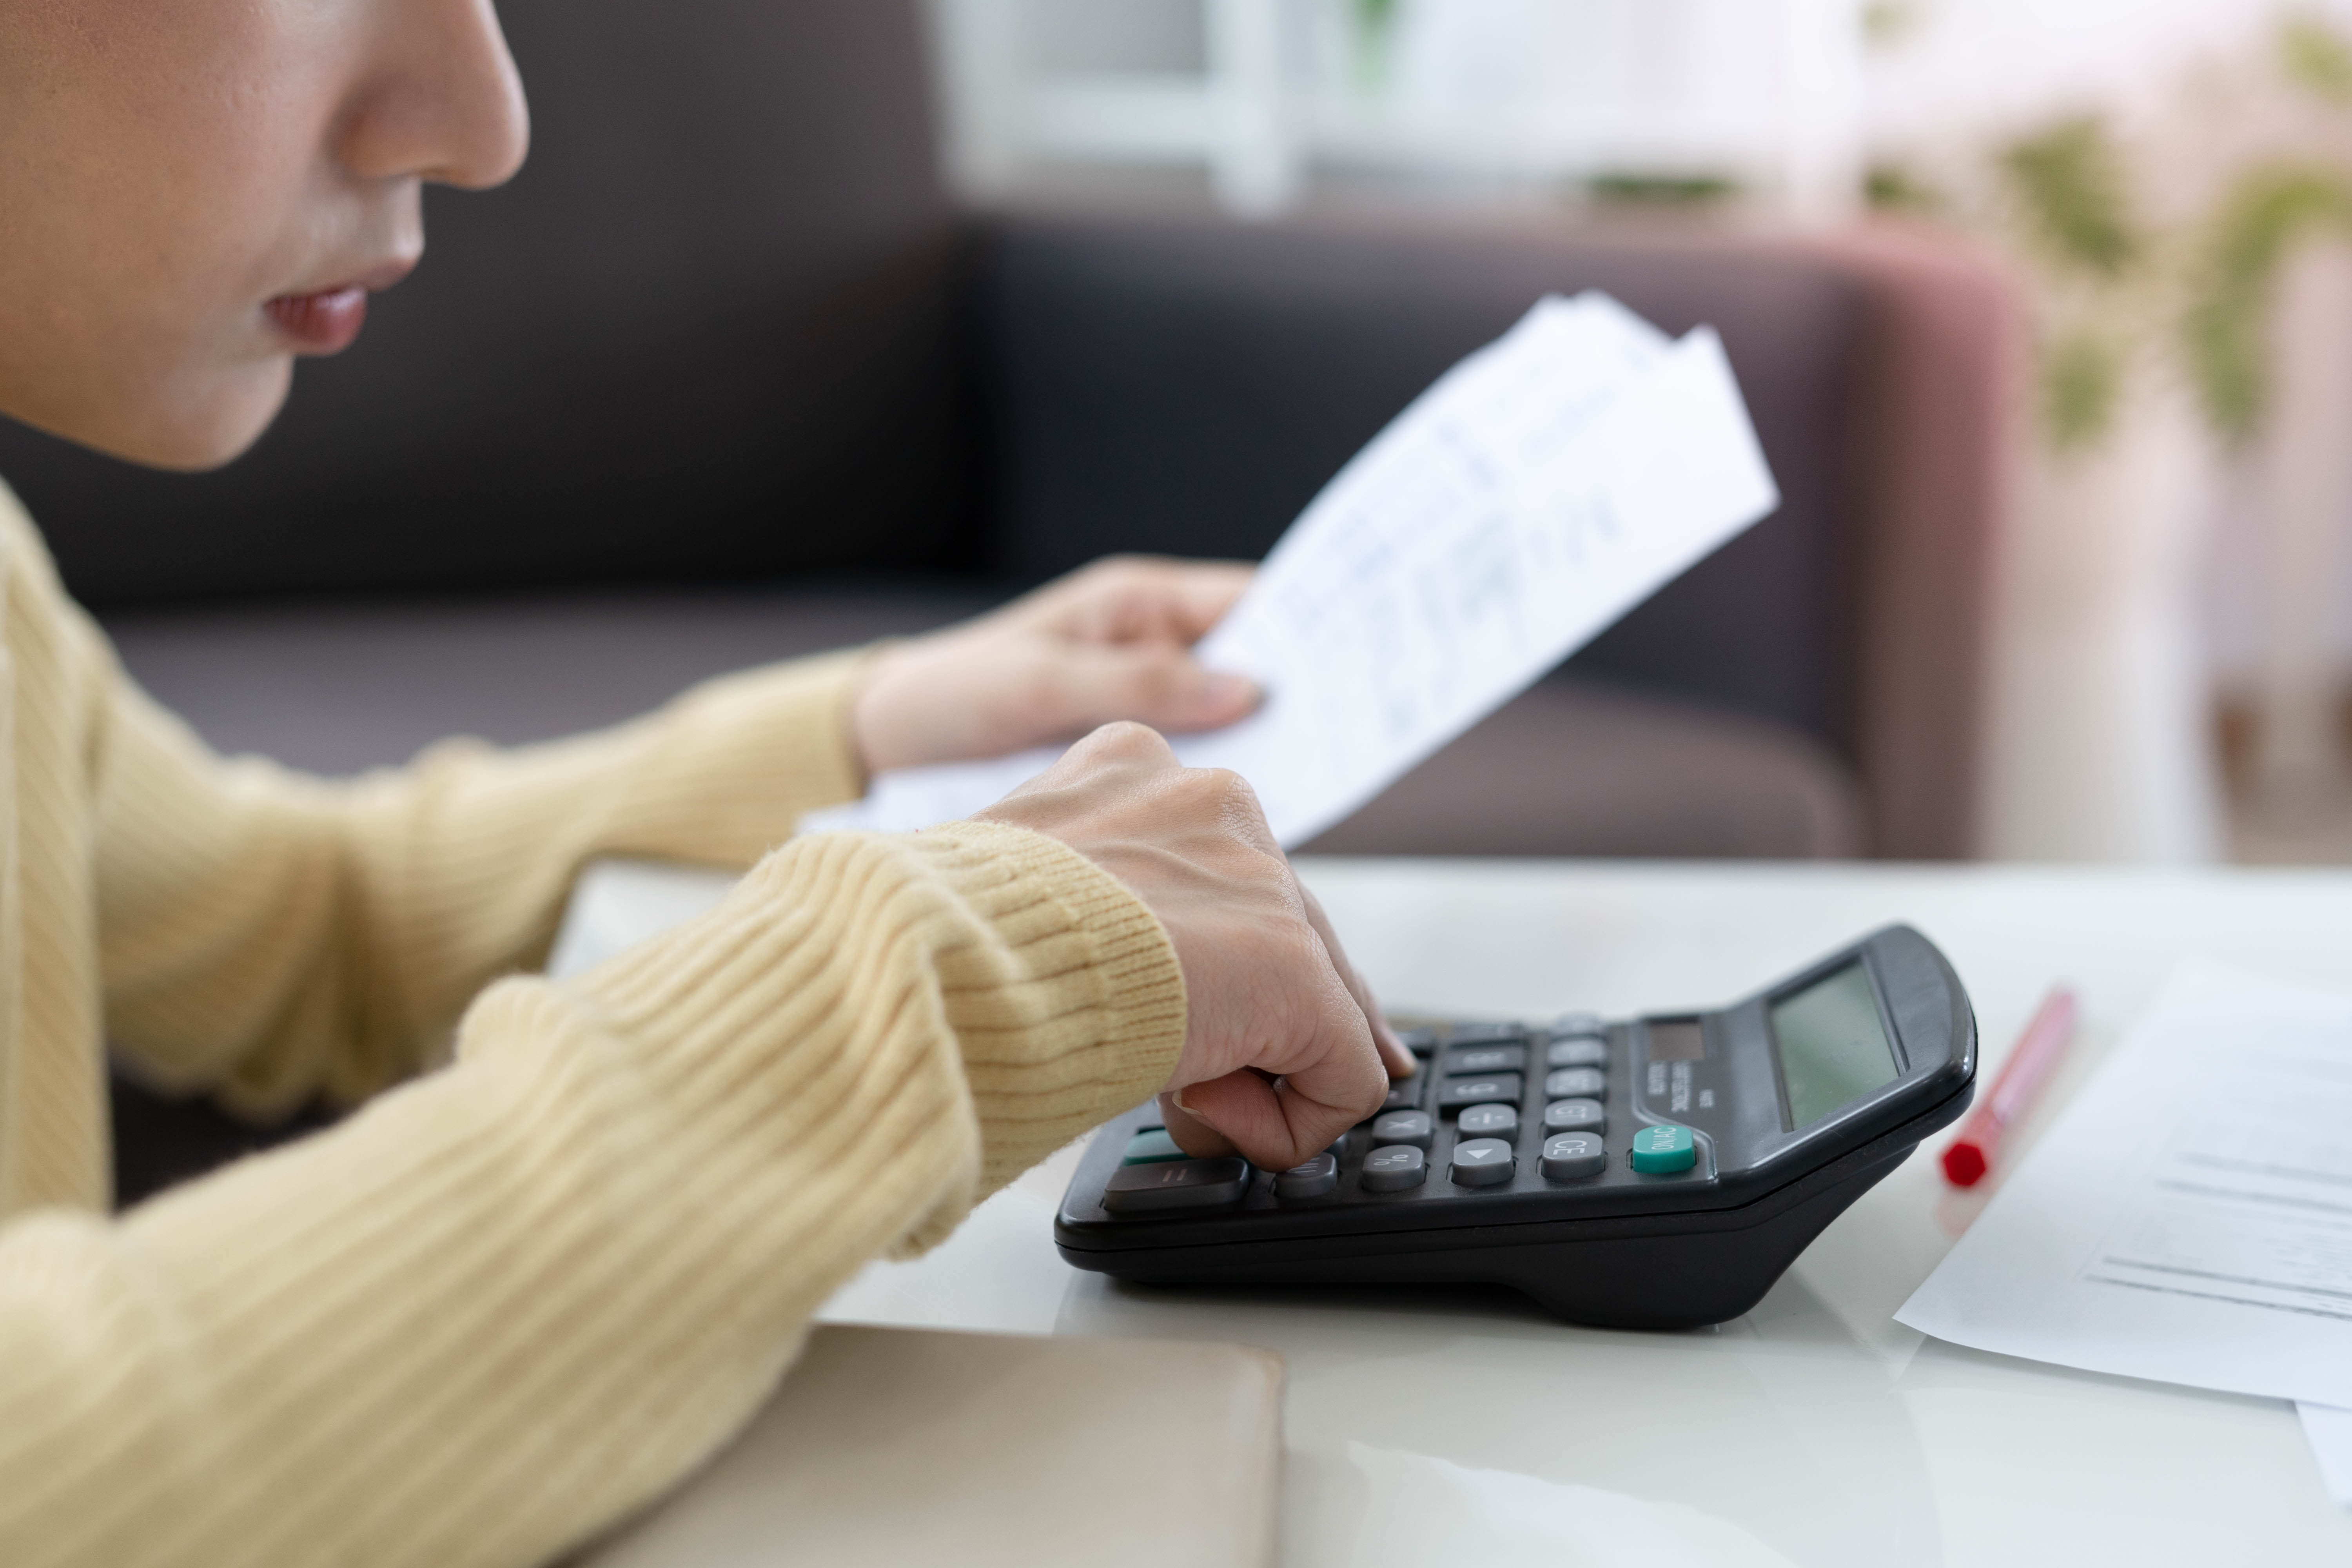 A woman calculating her expenses | Source: Shutterstock